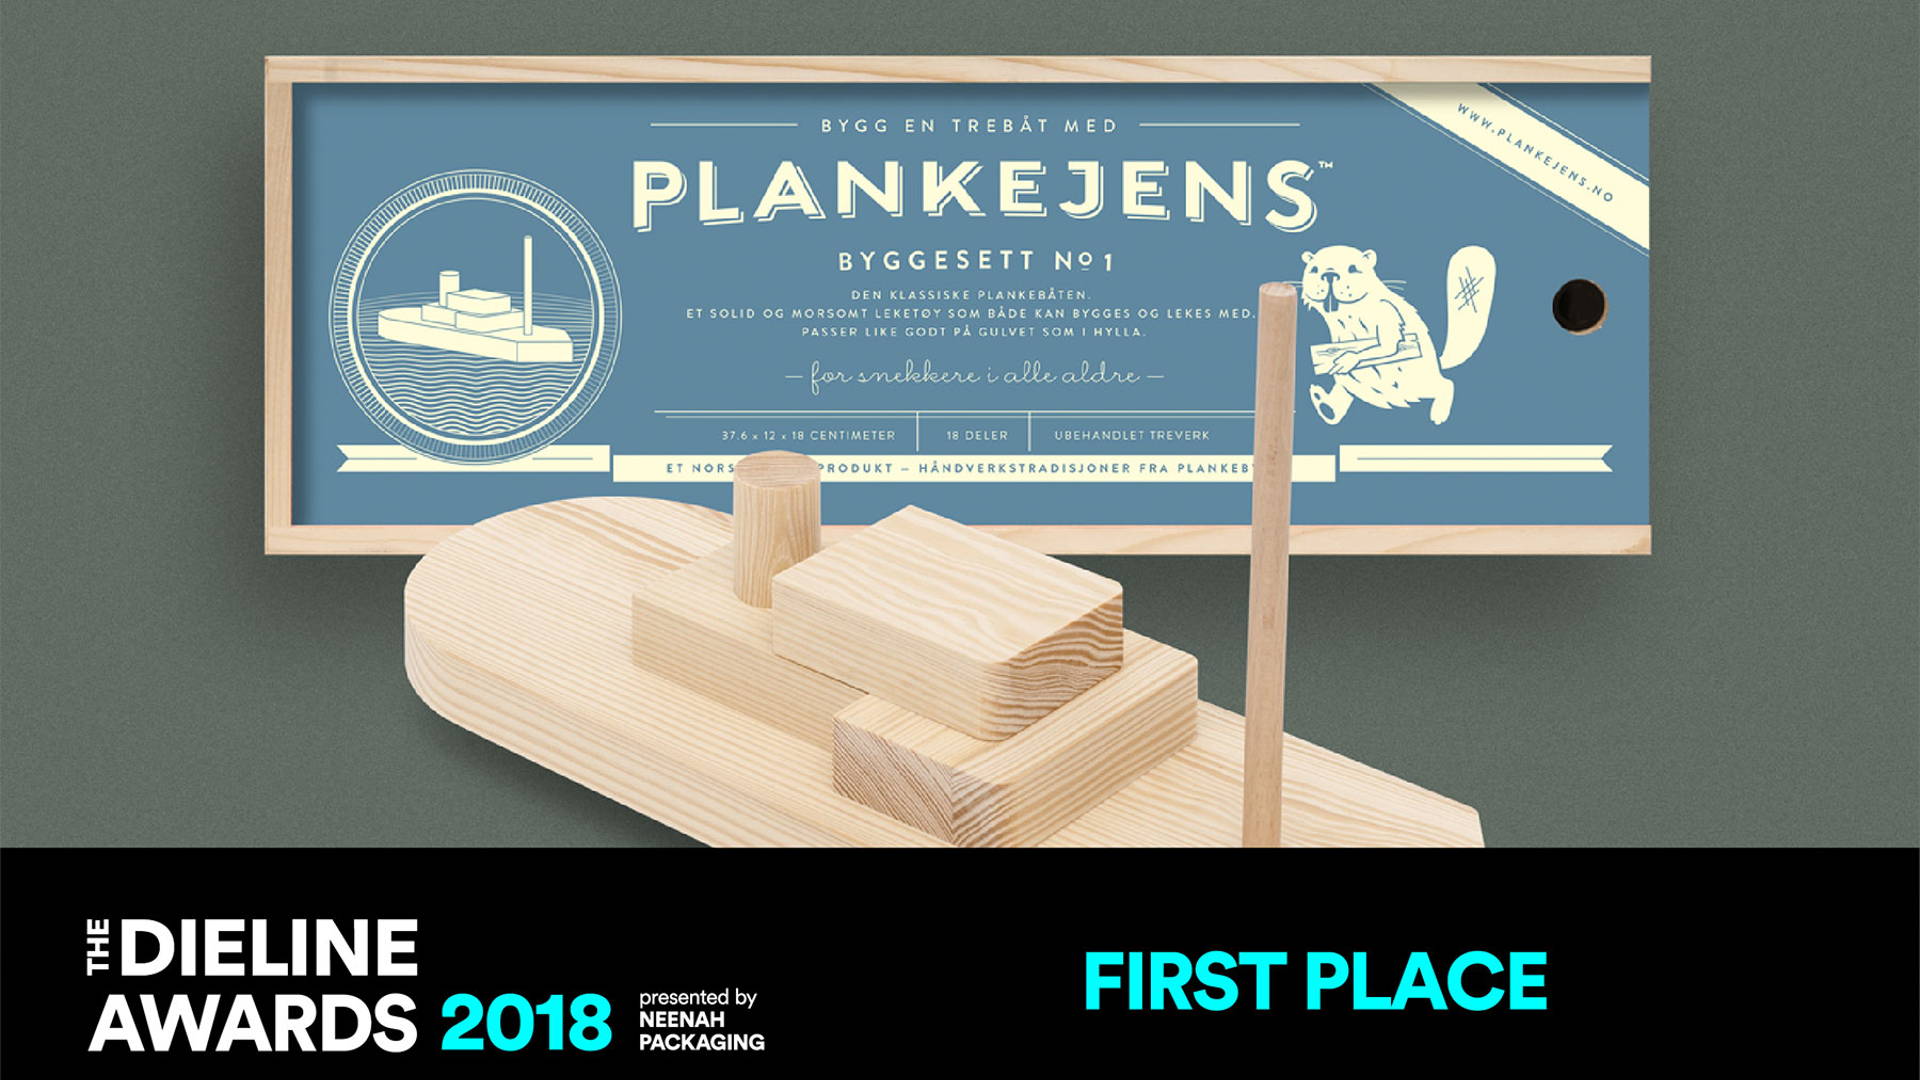 Featured image for The Dieline Awards 2018 - Games, Toys, Sports, & Recreational: PlankeJens